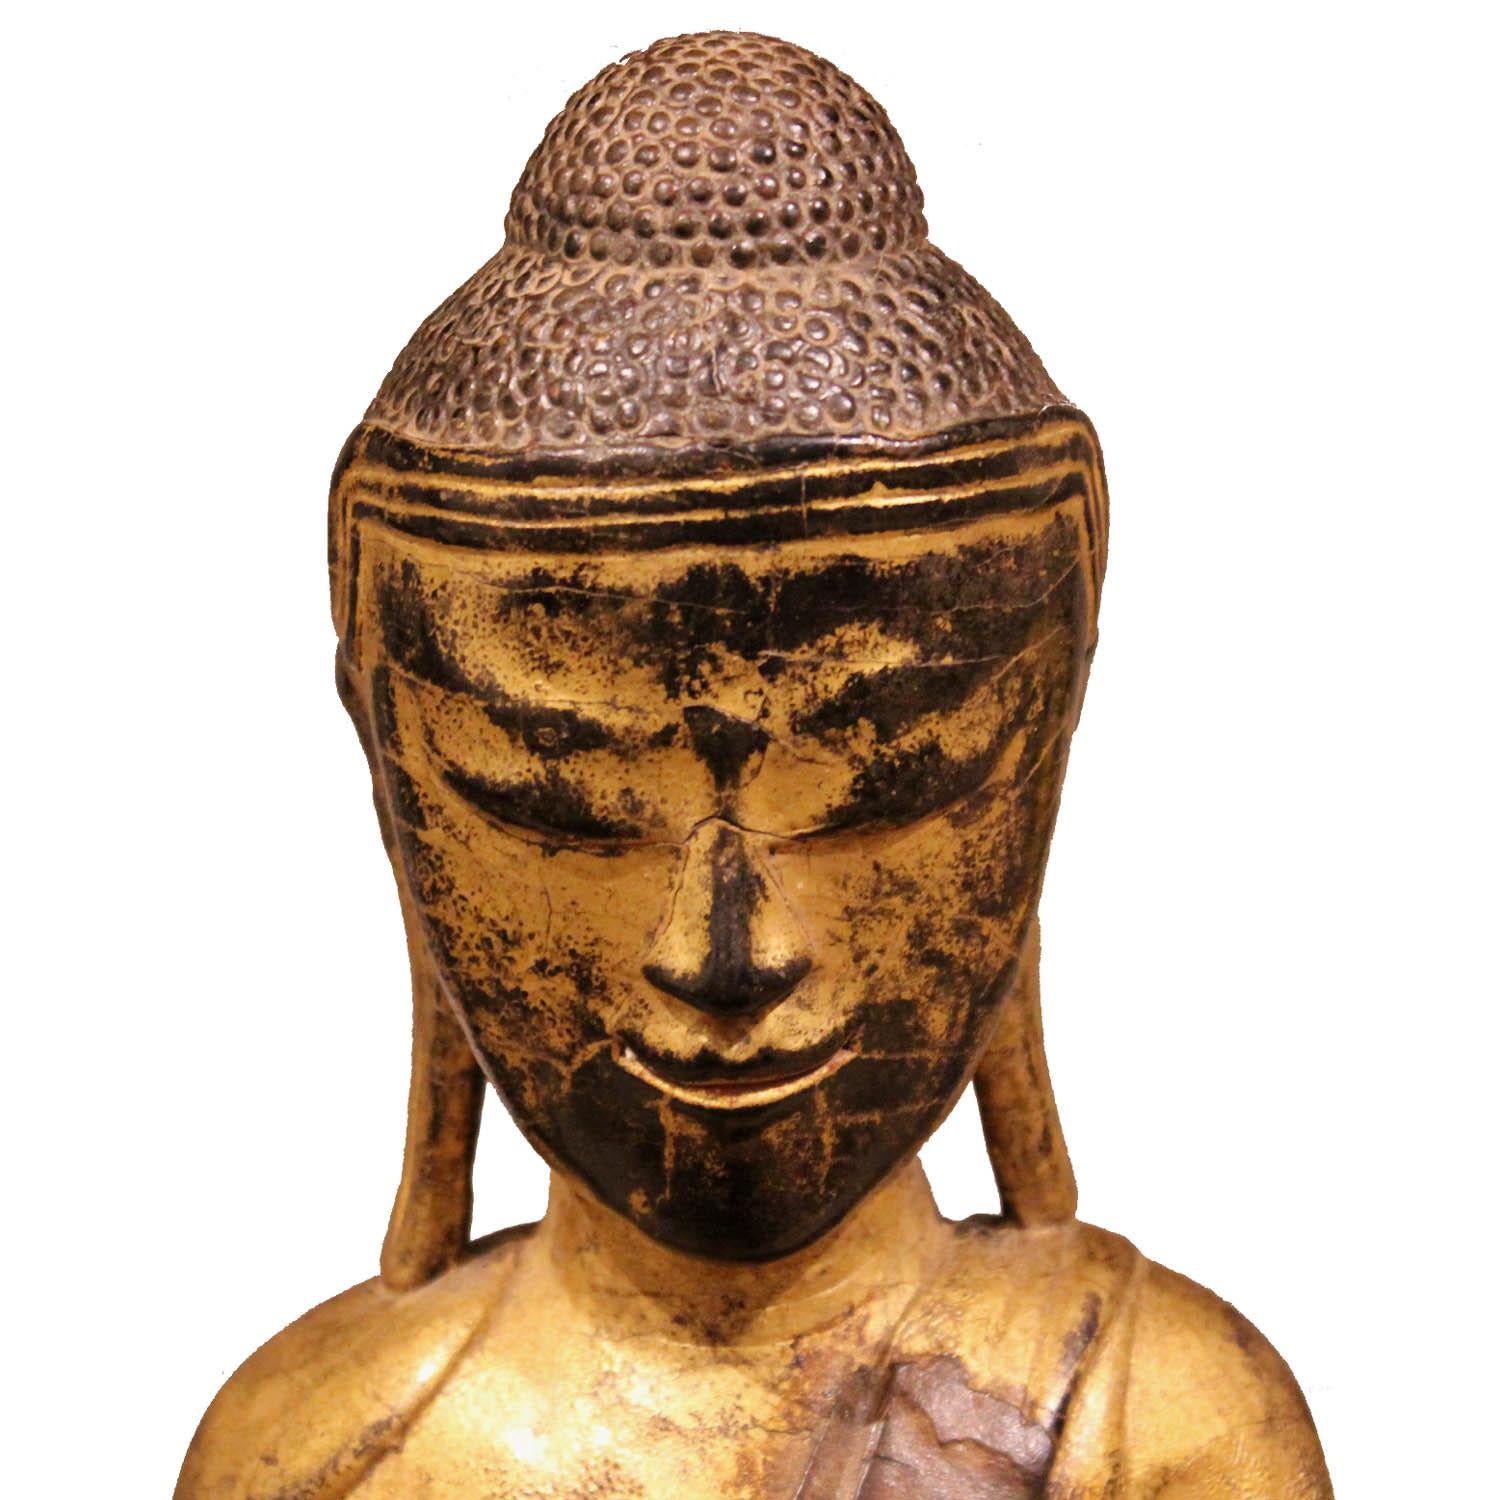 Vintage gold-leaf and red lacquer sitting monk from Burma with touching the earth mudra, praying for the fulfillment of all wishes.